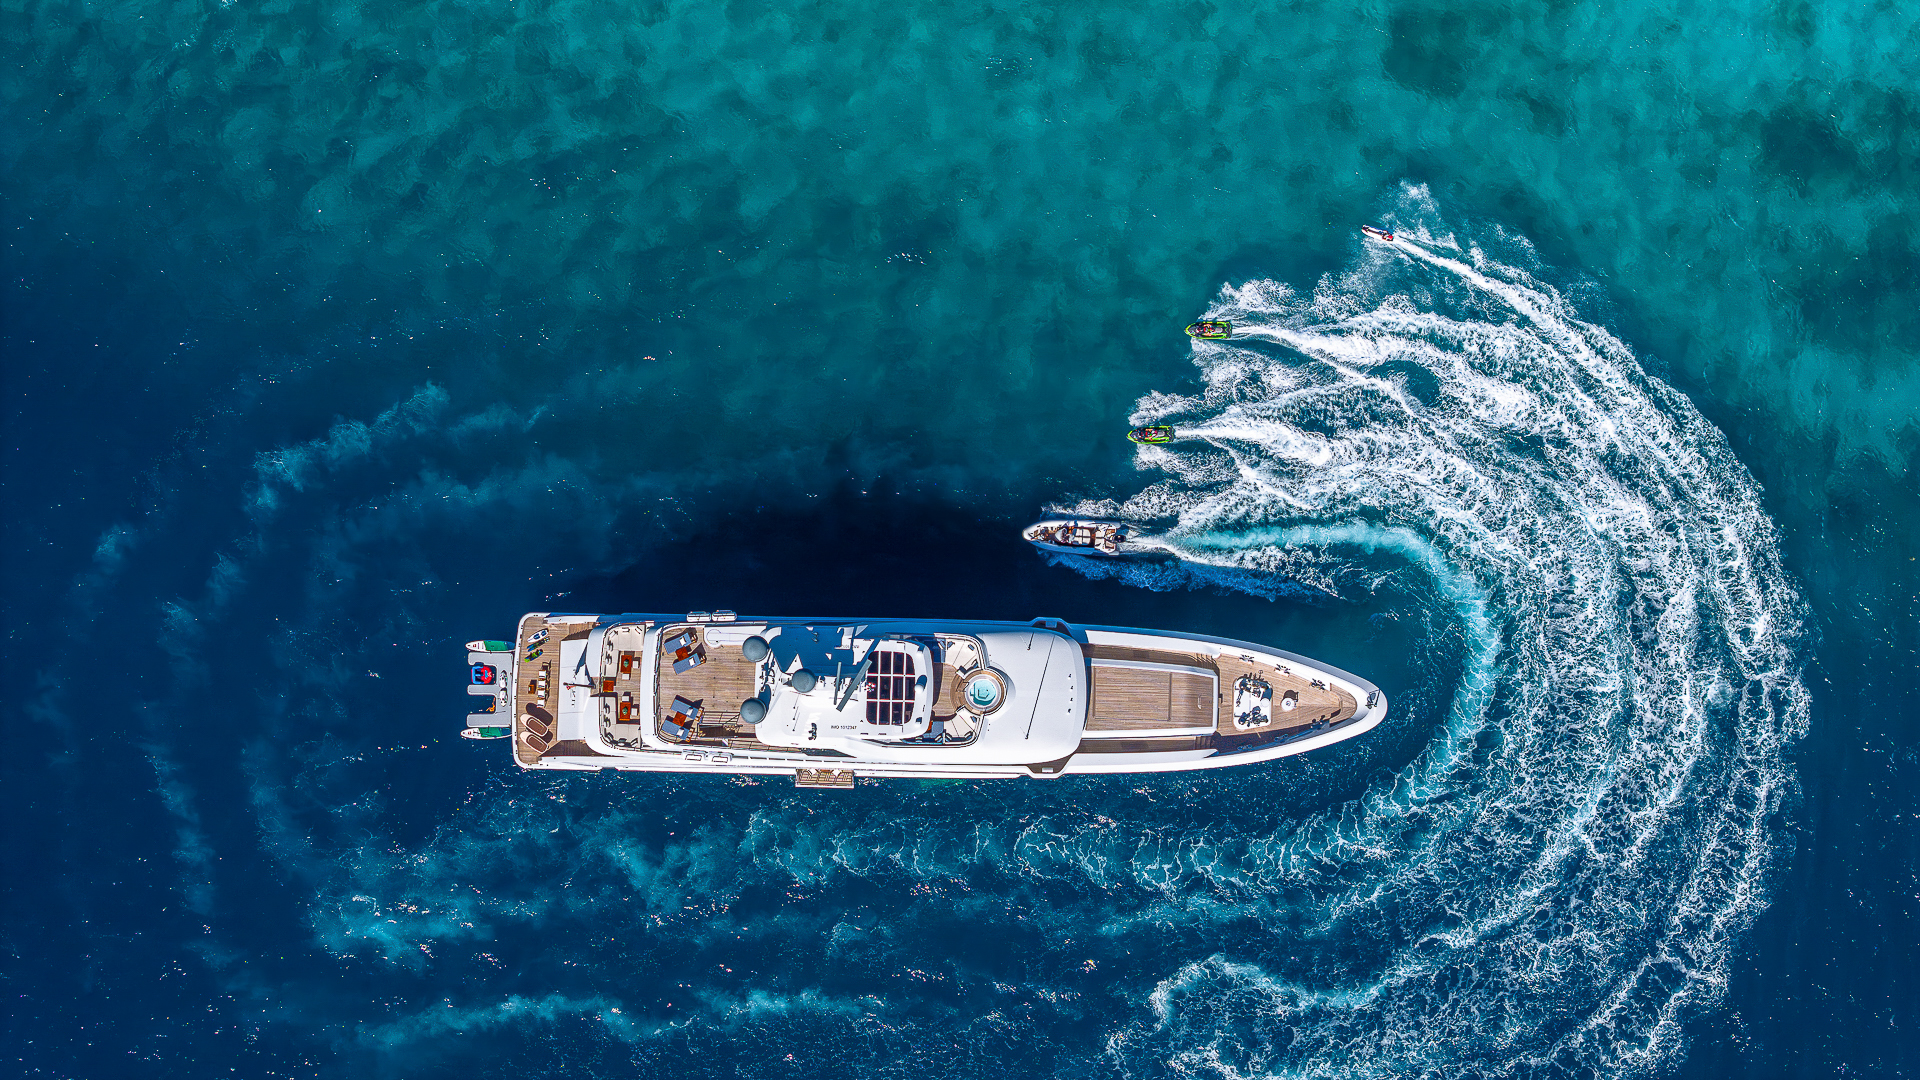 Rock It Aerial View With Toys - Credit Yachting Image